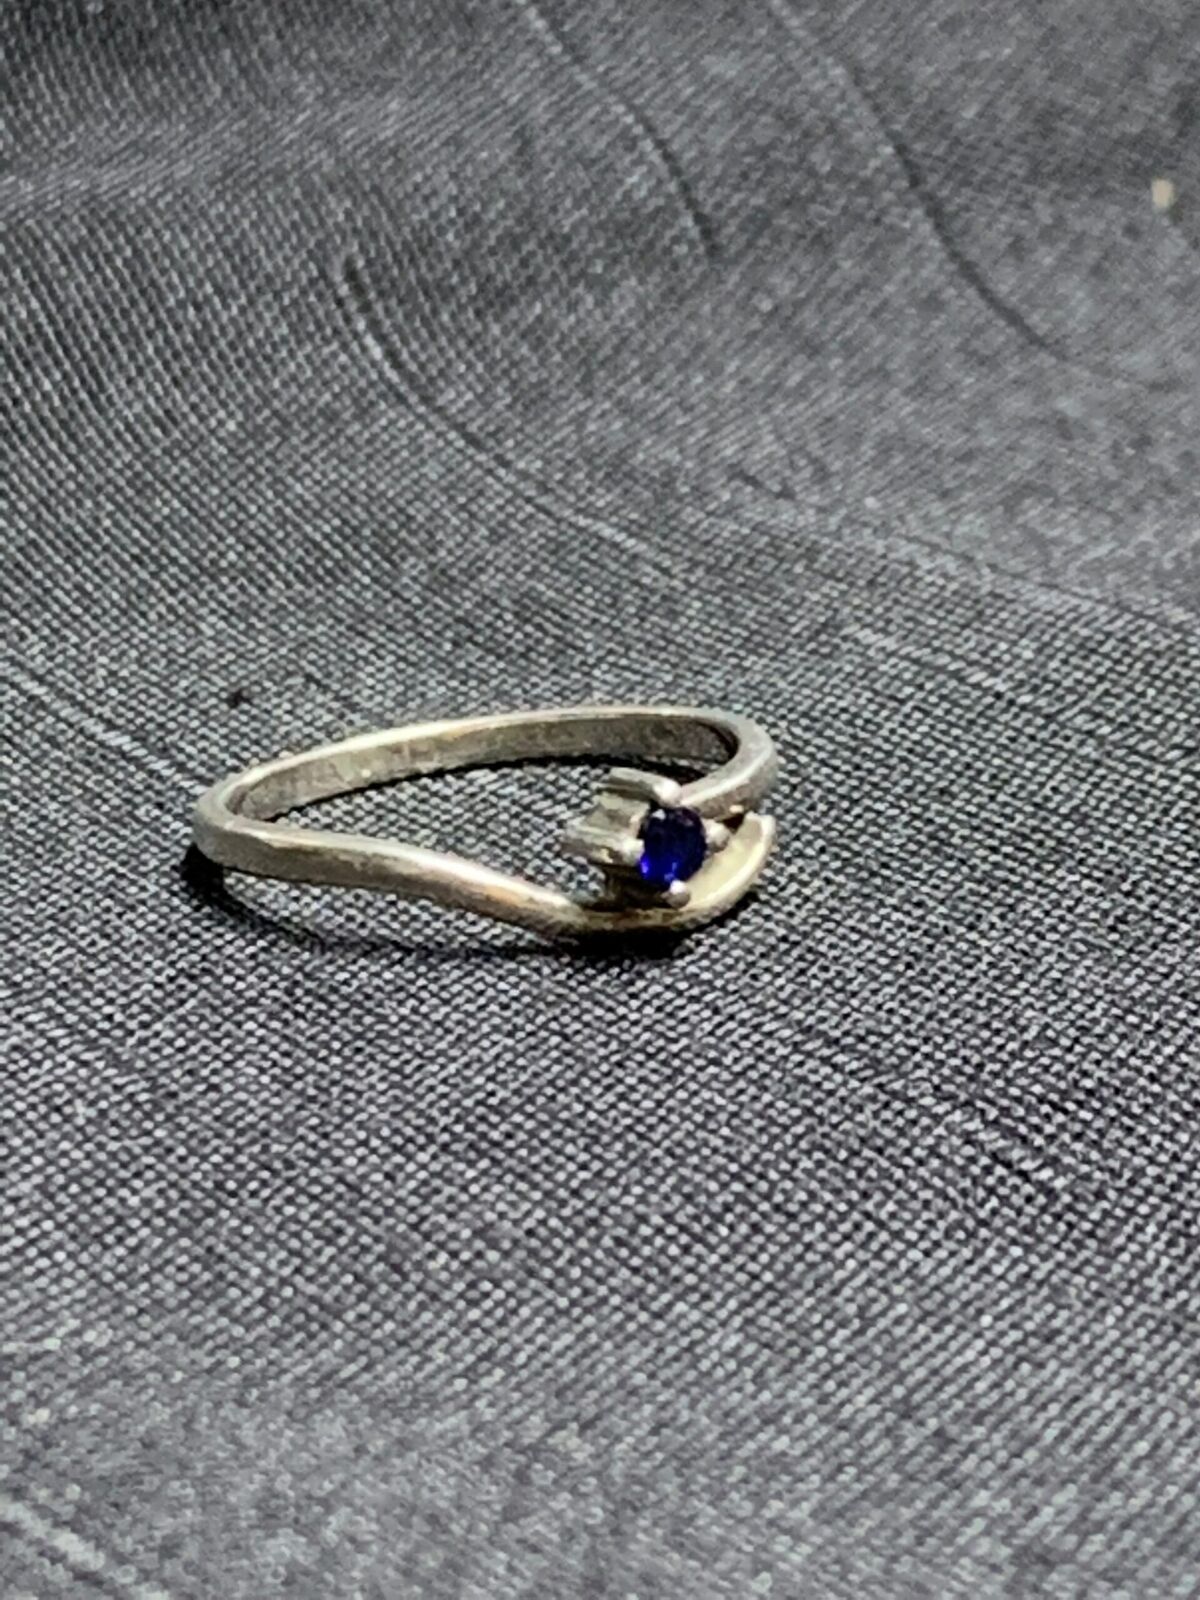 THIN SILVER RING - WITH DEEP BLUE STONE SETTING